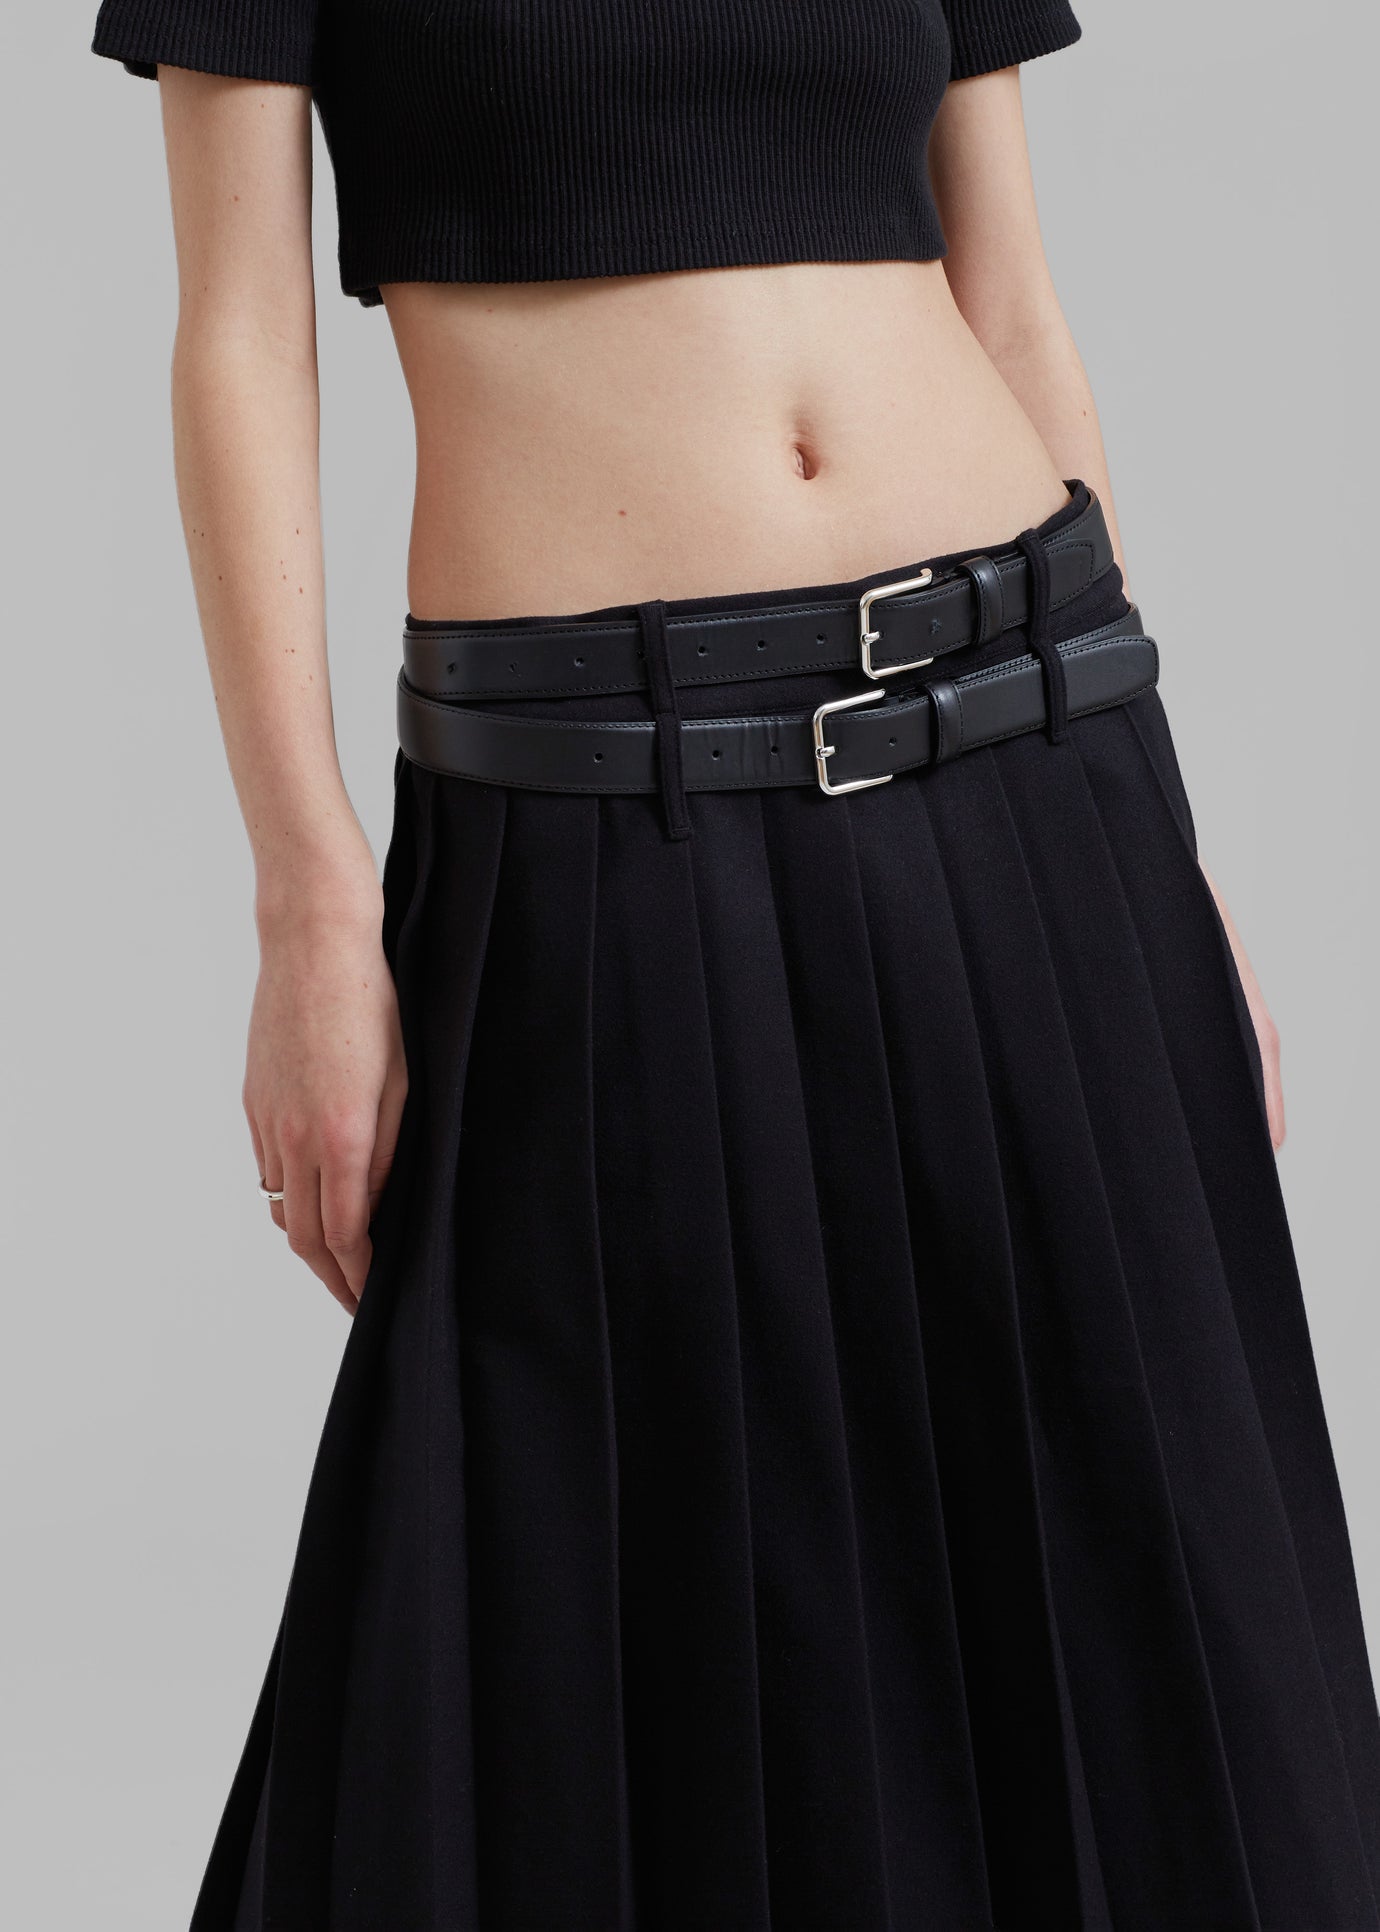 Wednesday Belted Pleated Skirt - Black - 1